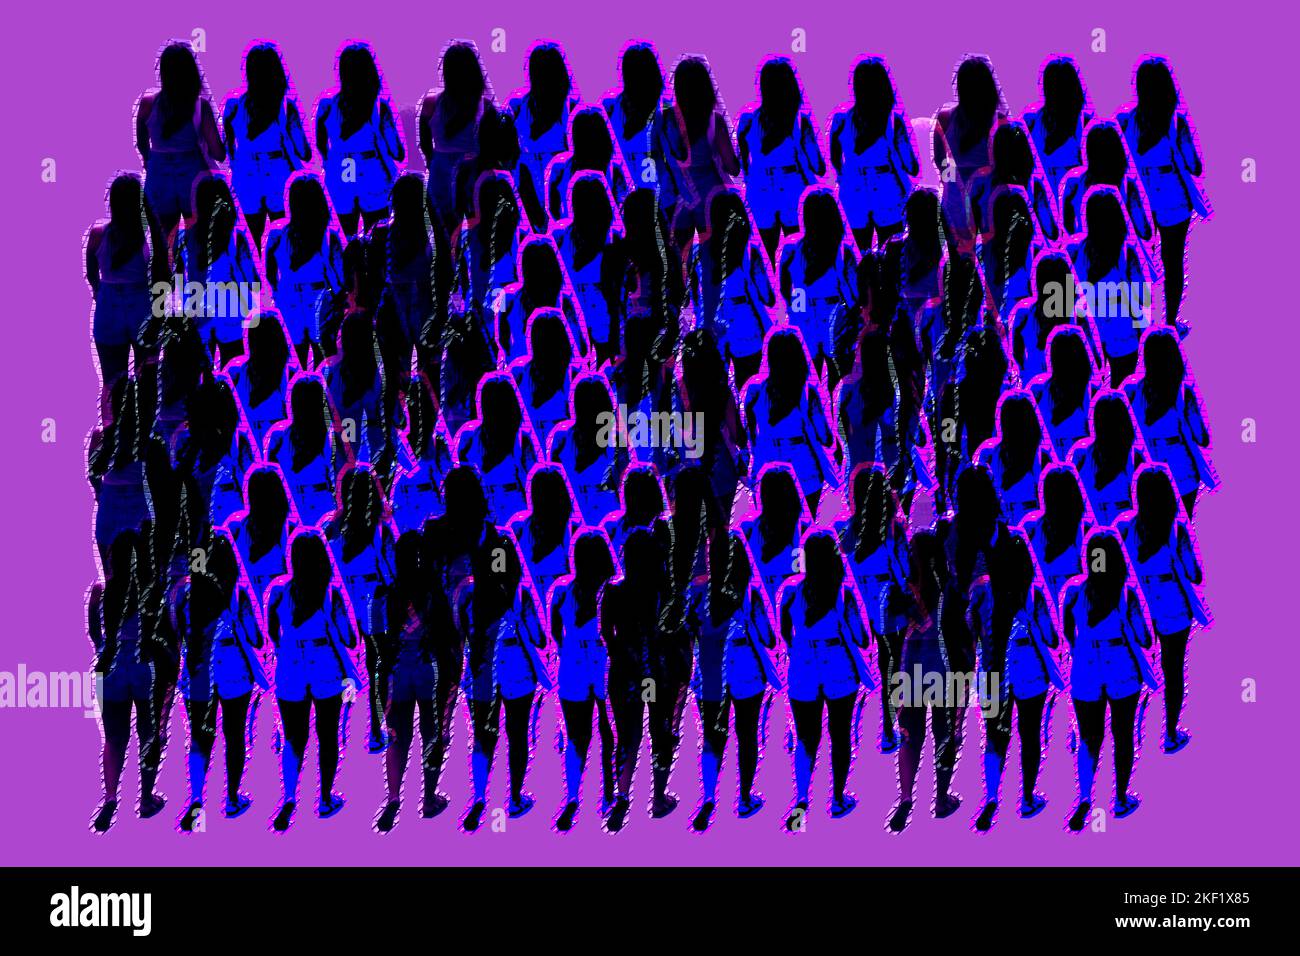 Crowd of women, 8 march, woman's day concept. Stock Photo